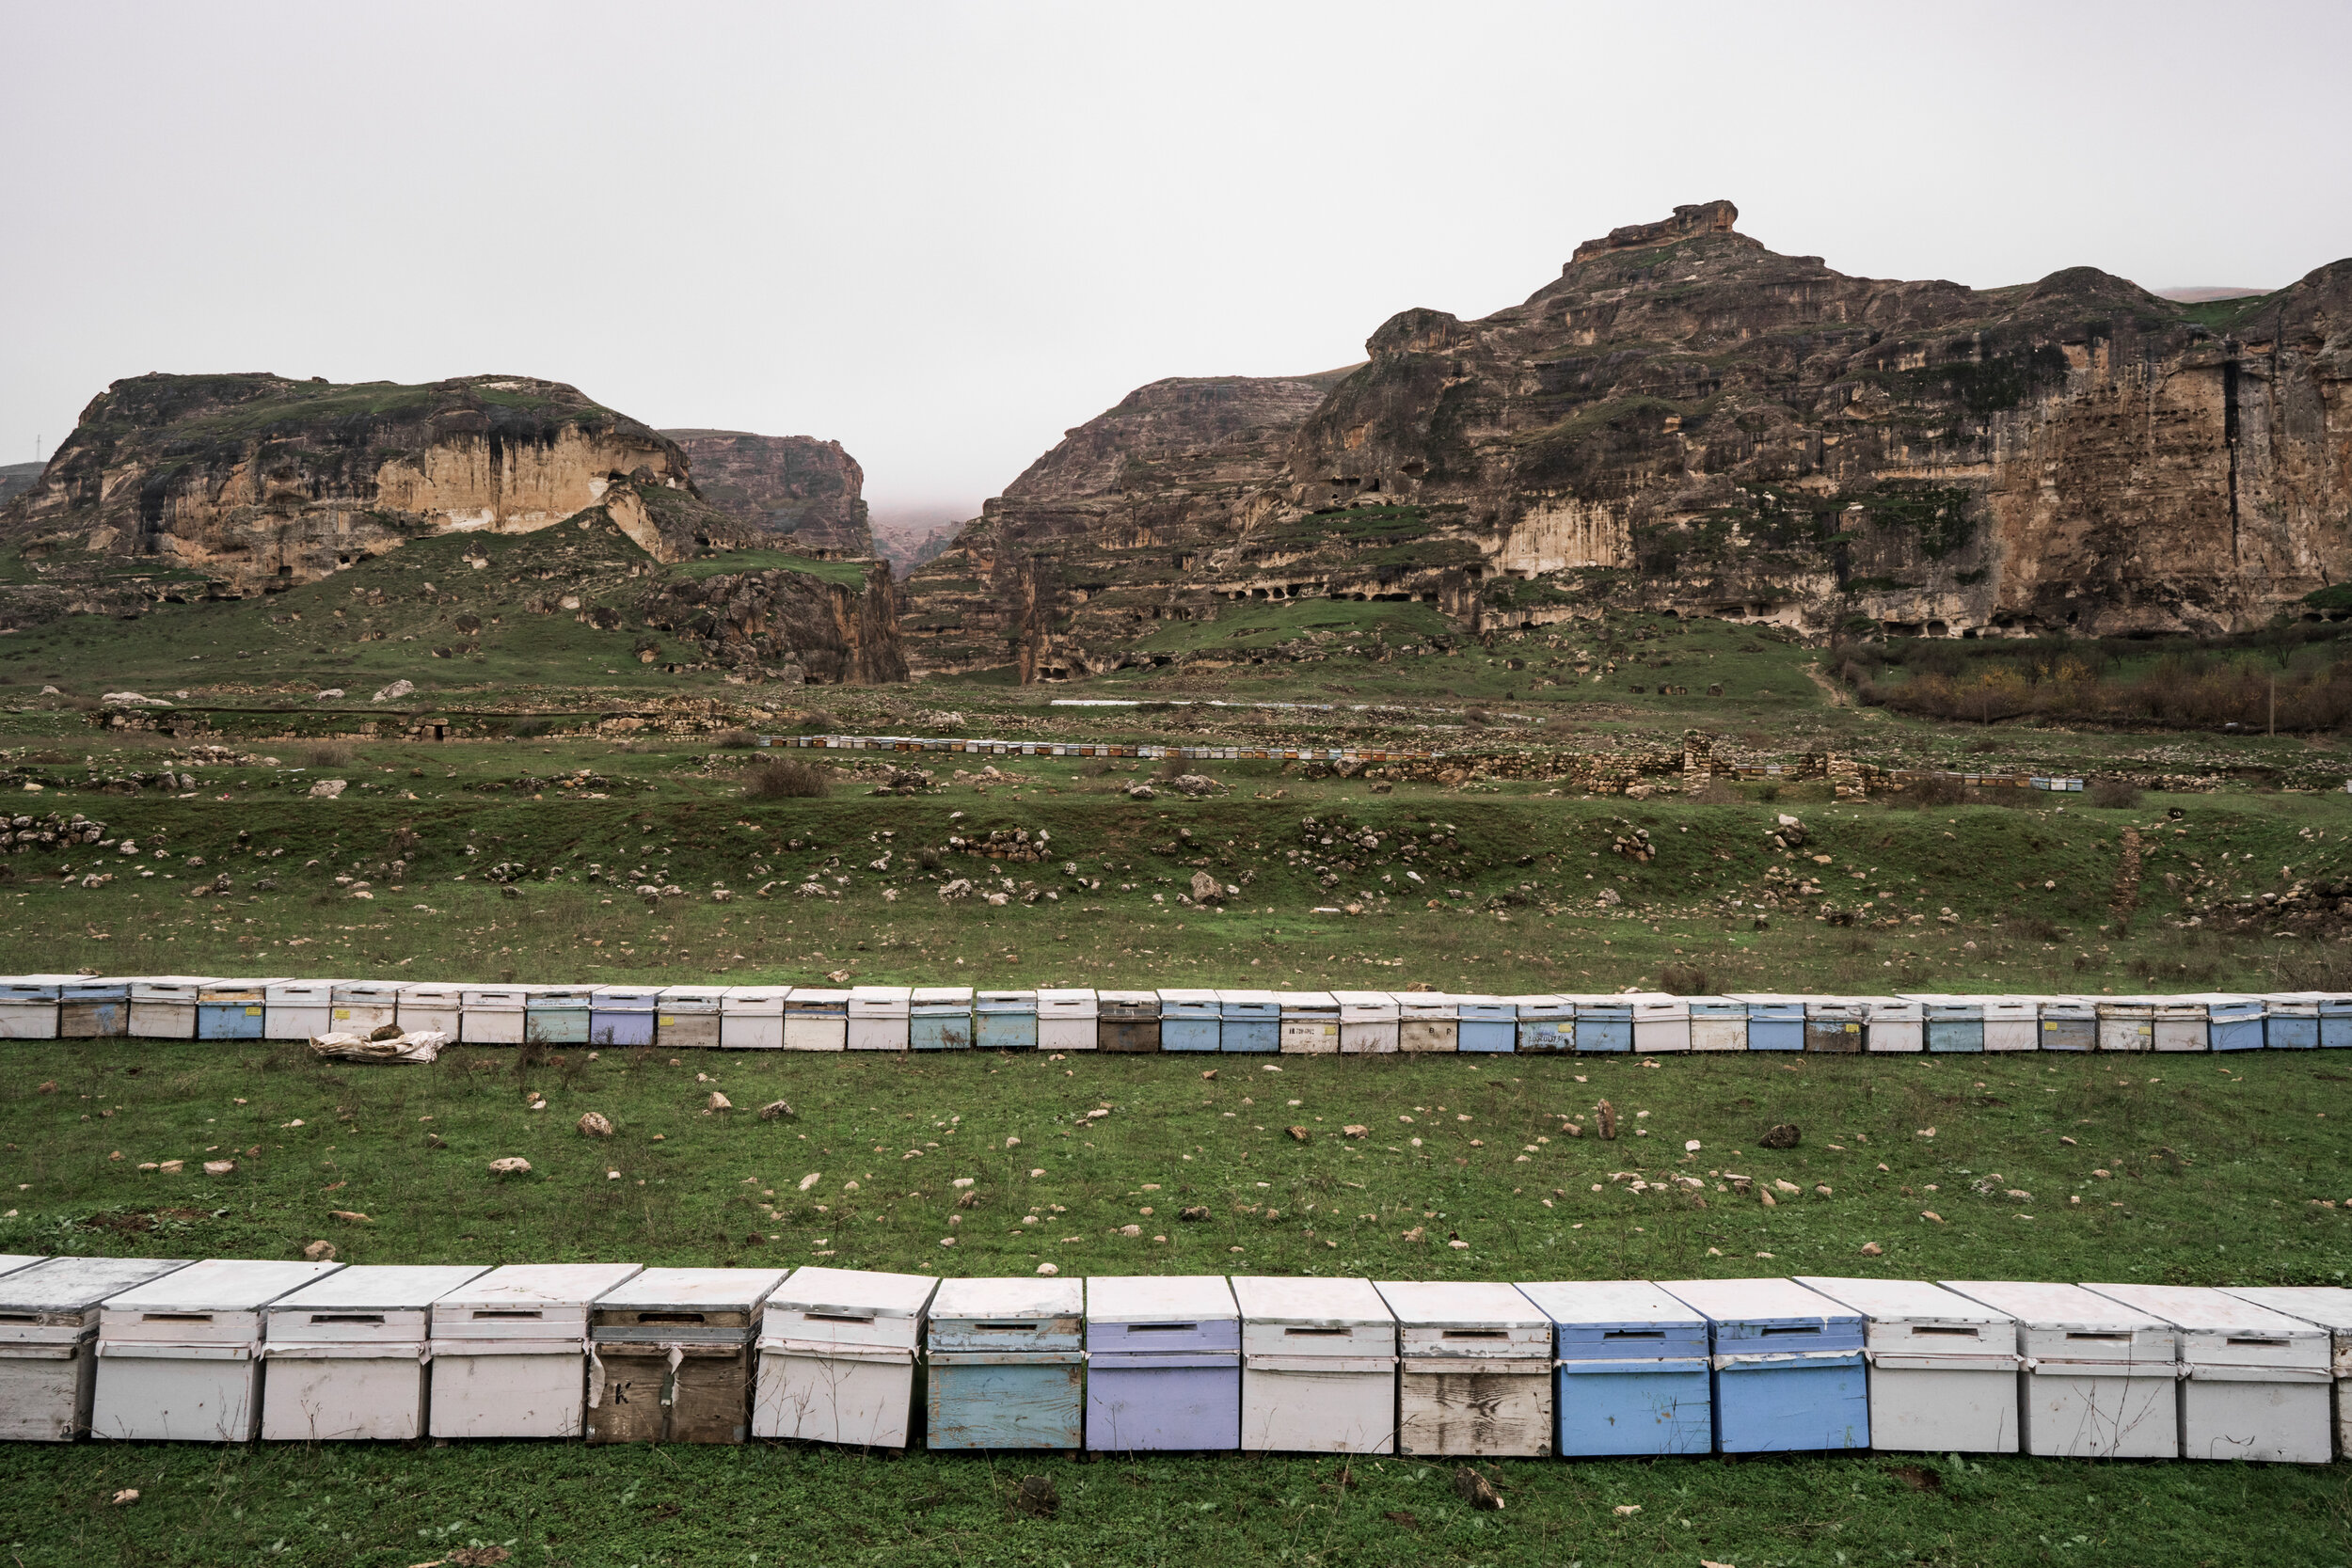 Beehives line the foundations of centuries-old palaces and urban forms in the Sâlihiyye Gardens